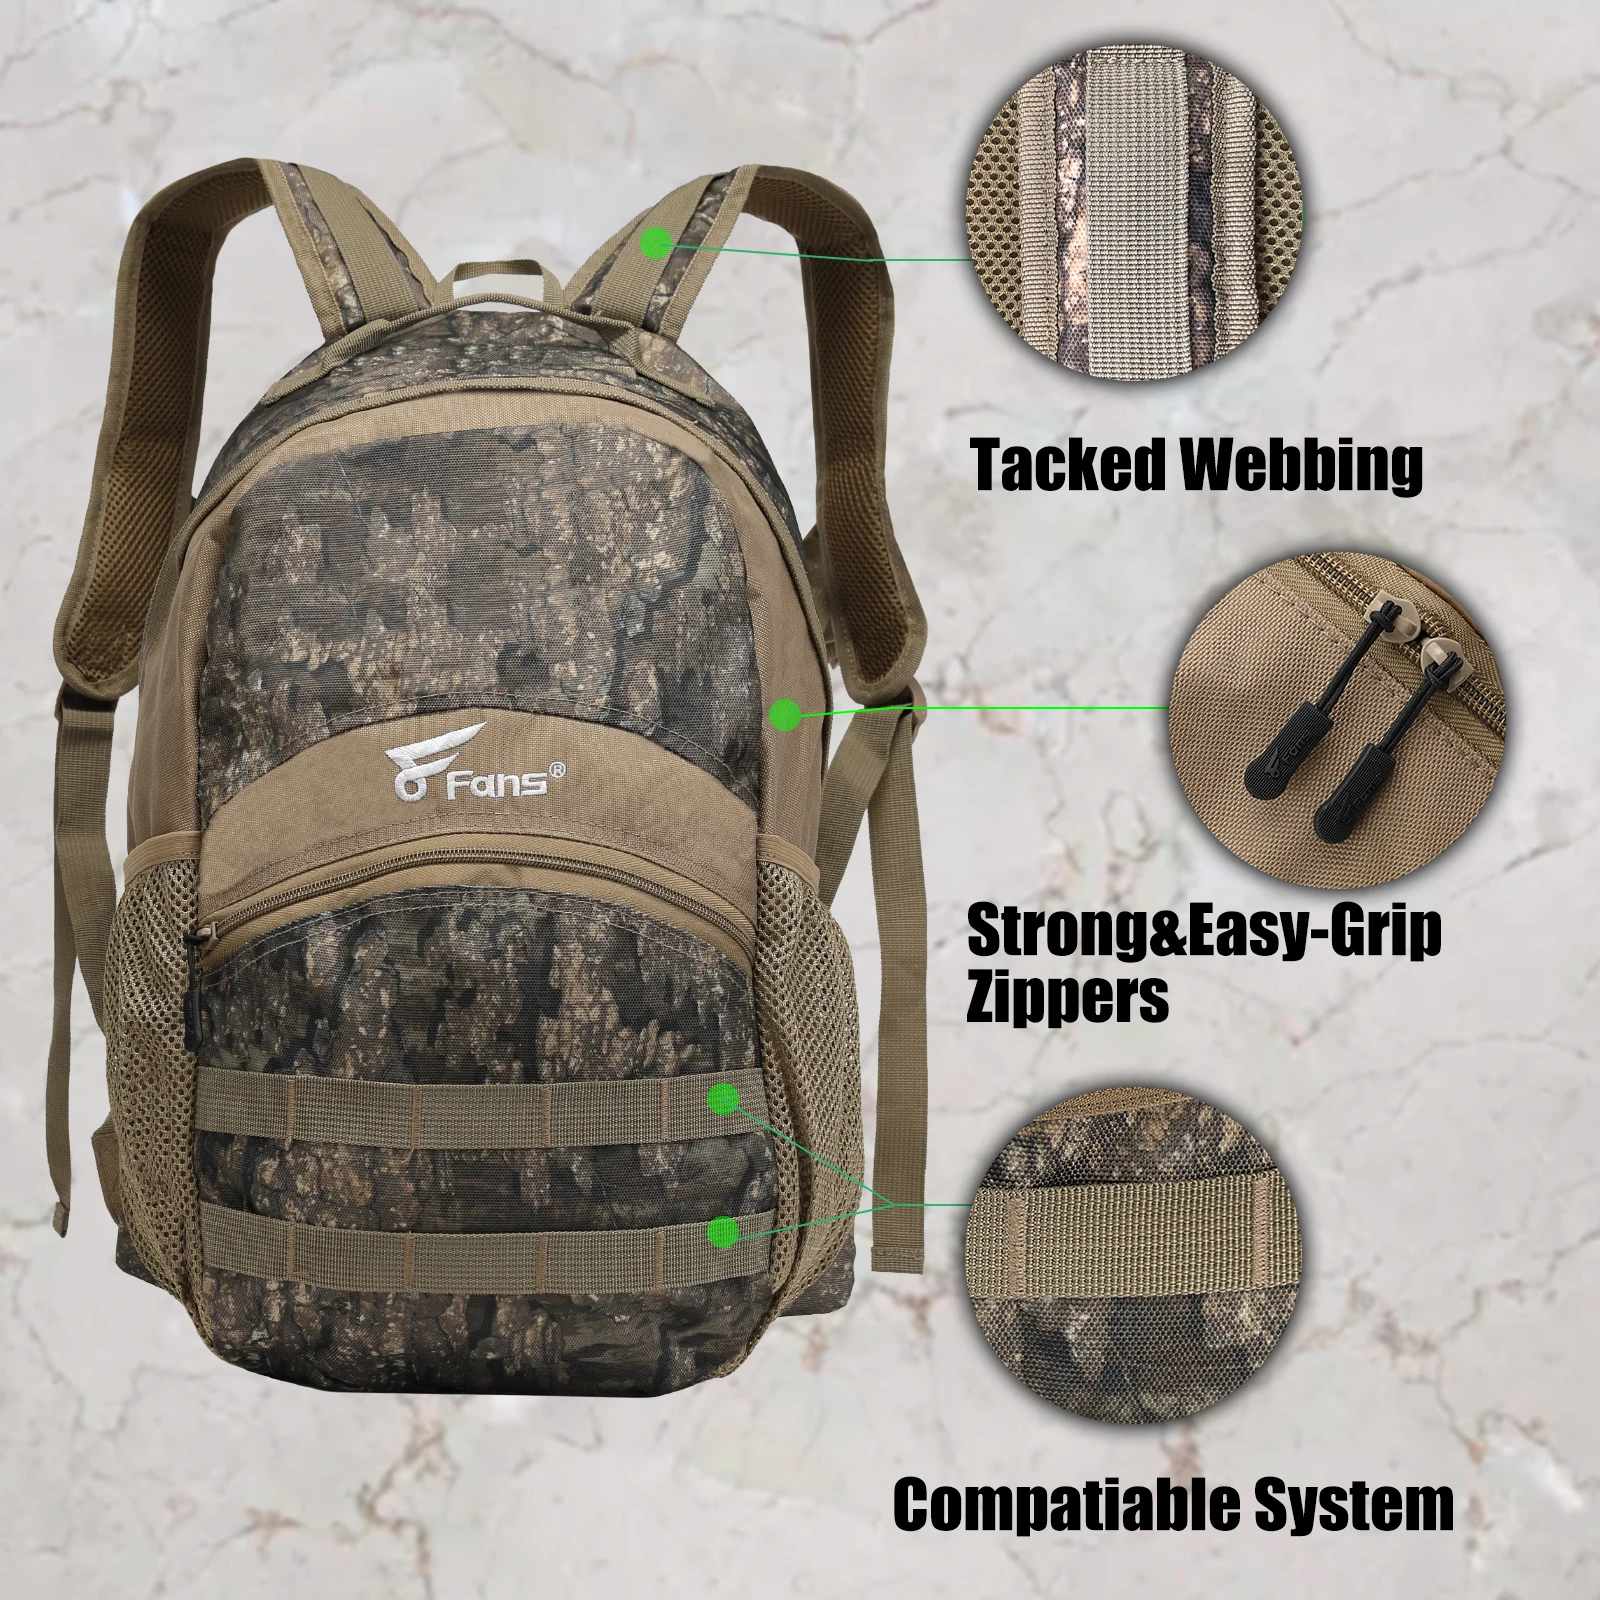 8Fans Hunting Backpack, Realtree Timber Camo Hunting Bag Durable Large Capacity Hunting Pack for Hunting Hiking Camp enlarge